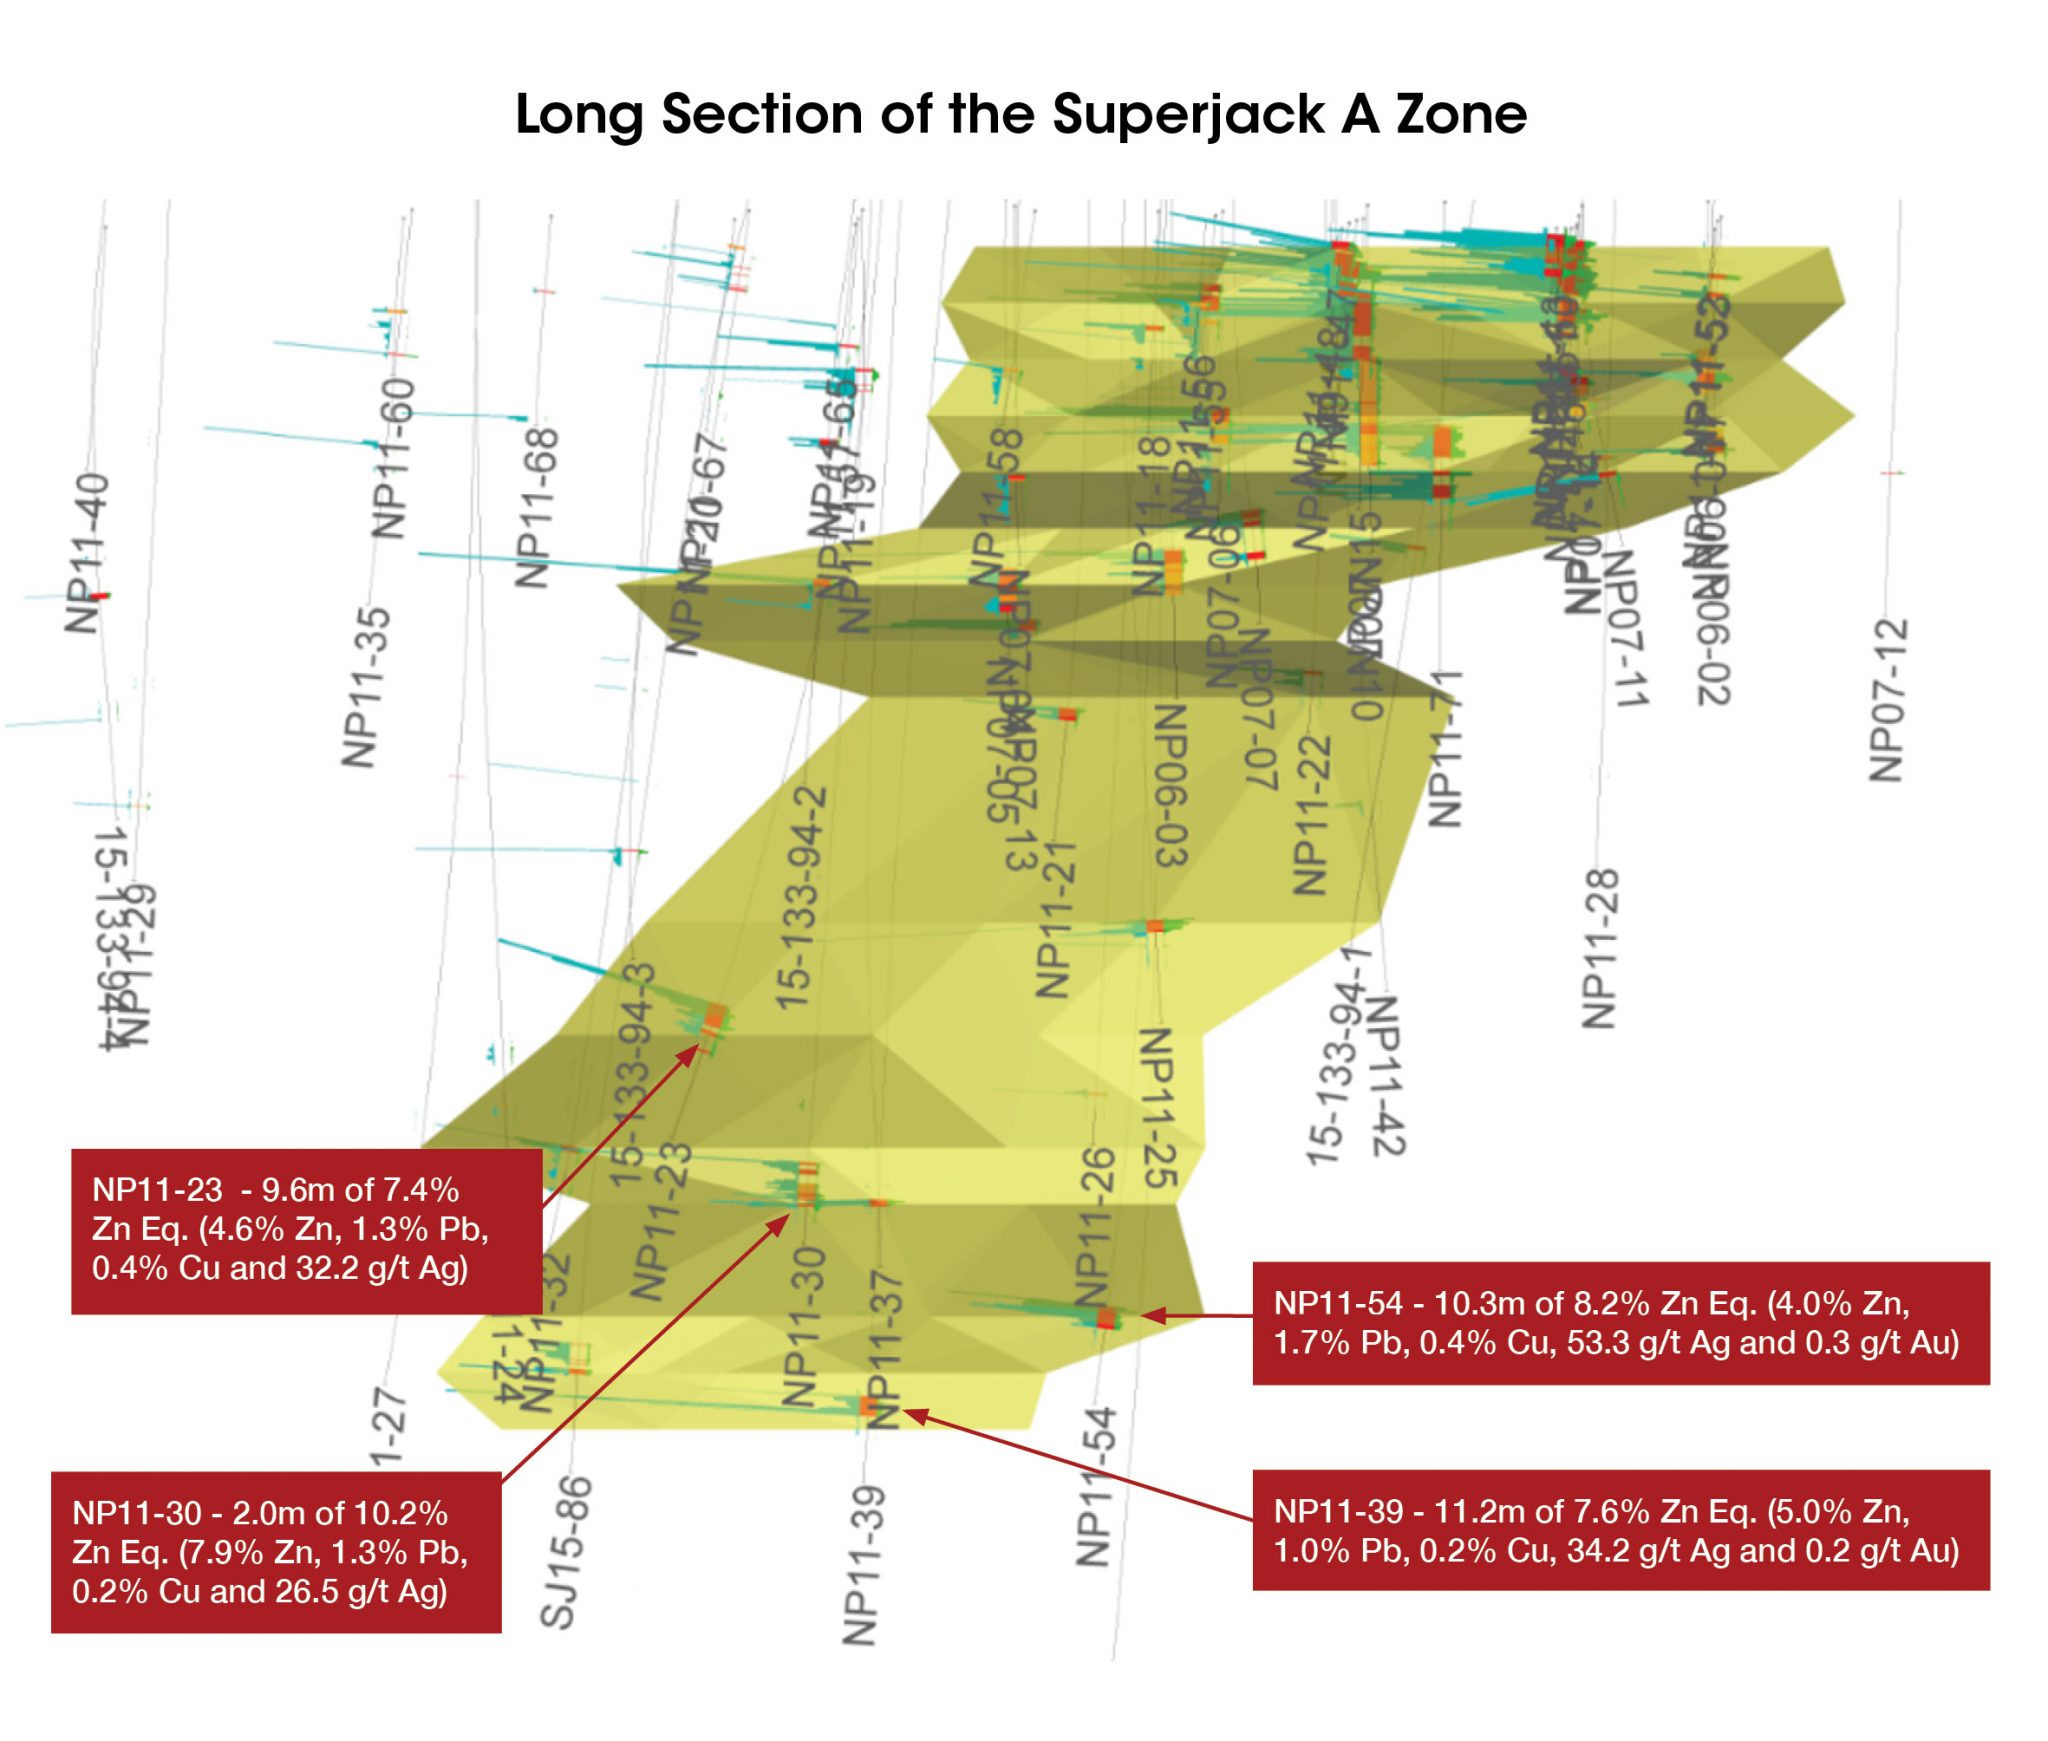 Long-Section-of-the-Superjack-A-Zone